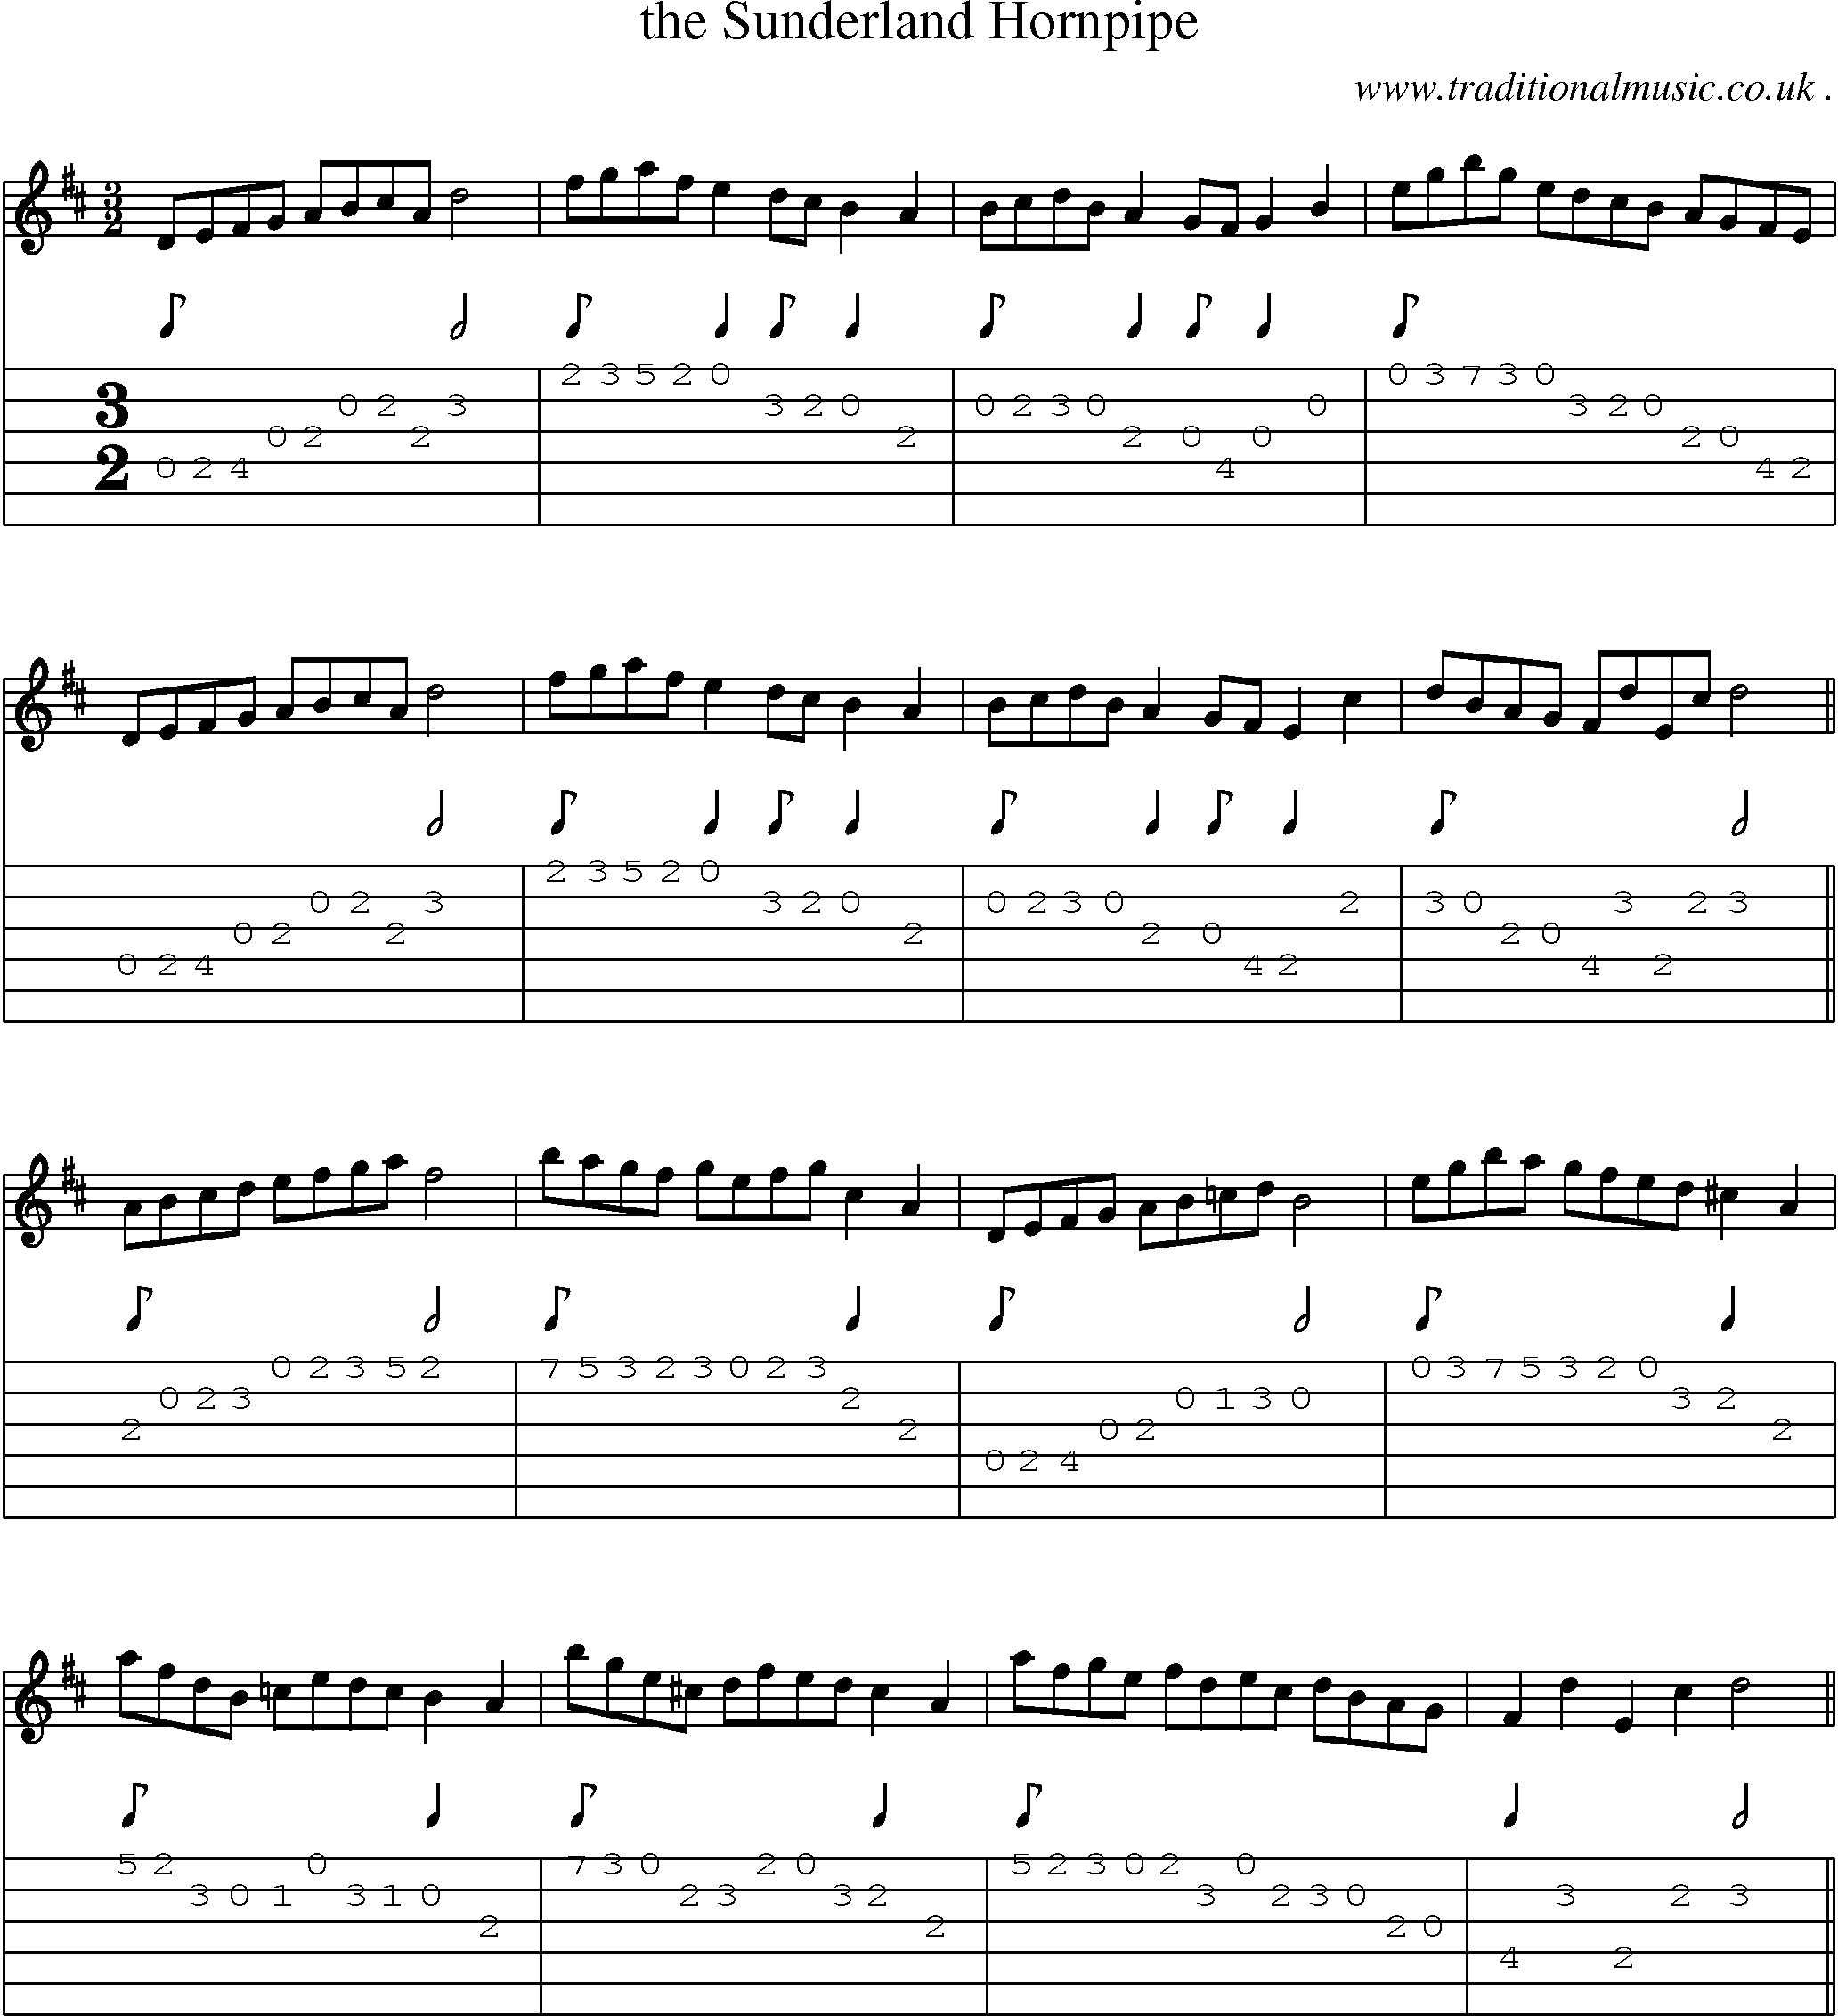 Sheet-Music and Guitar Tabs for The Sunderland Hornpipe